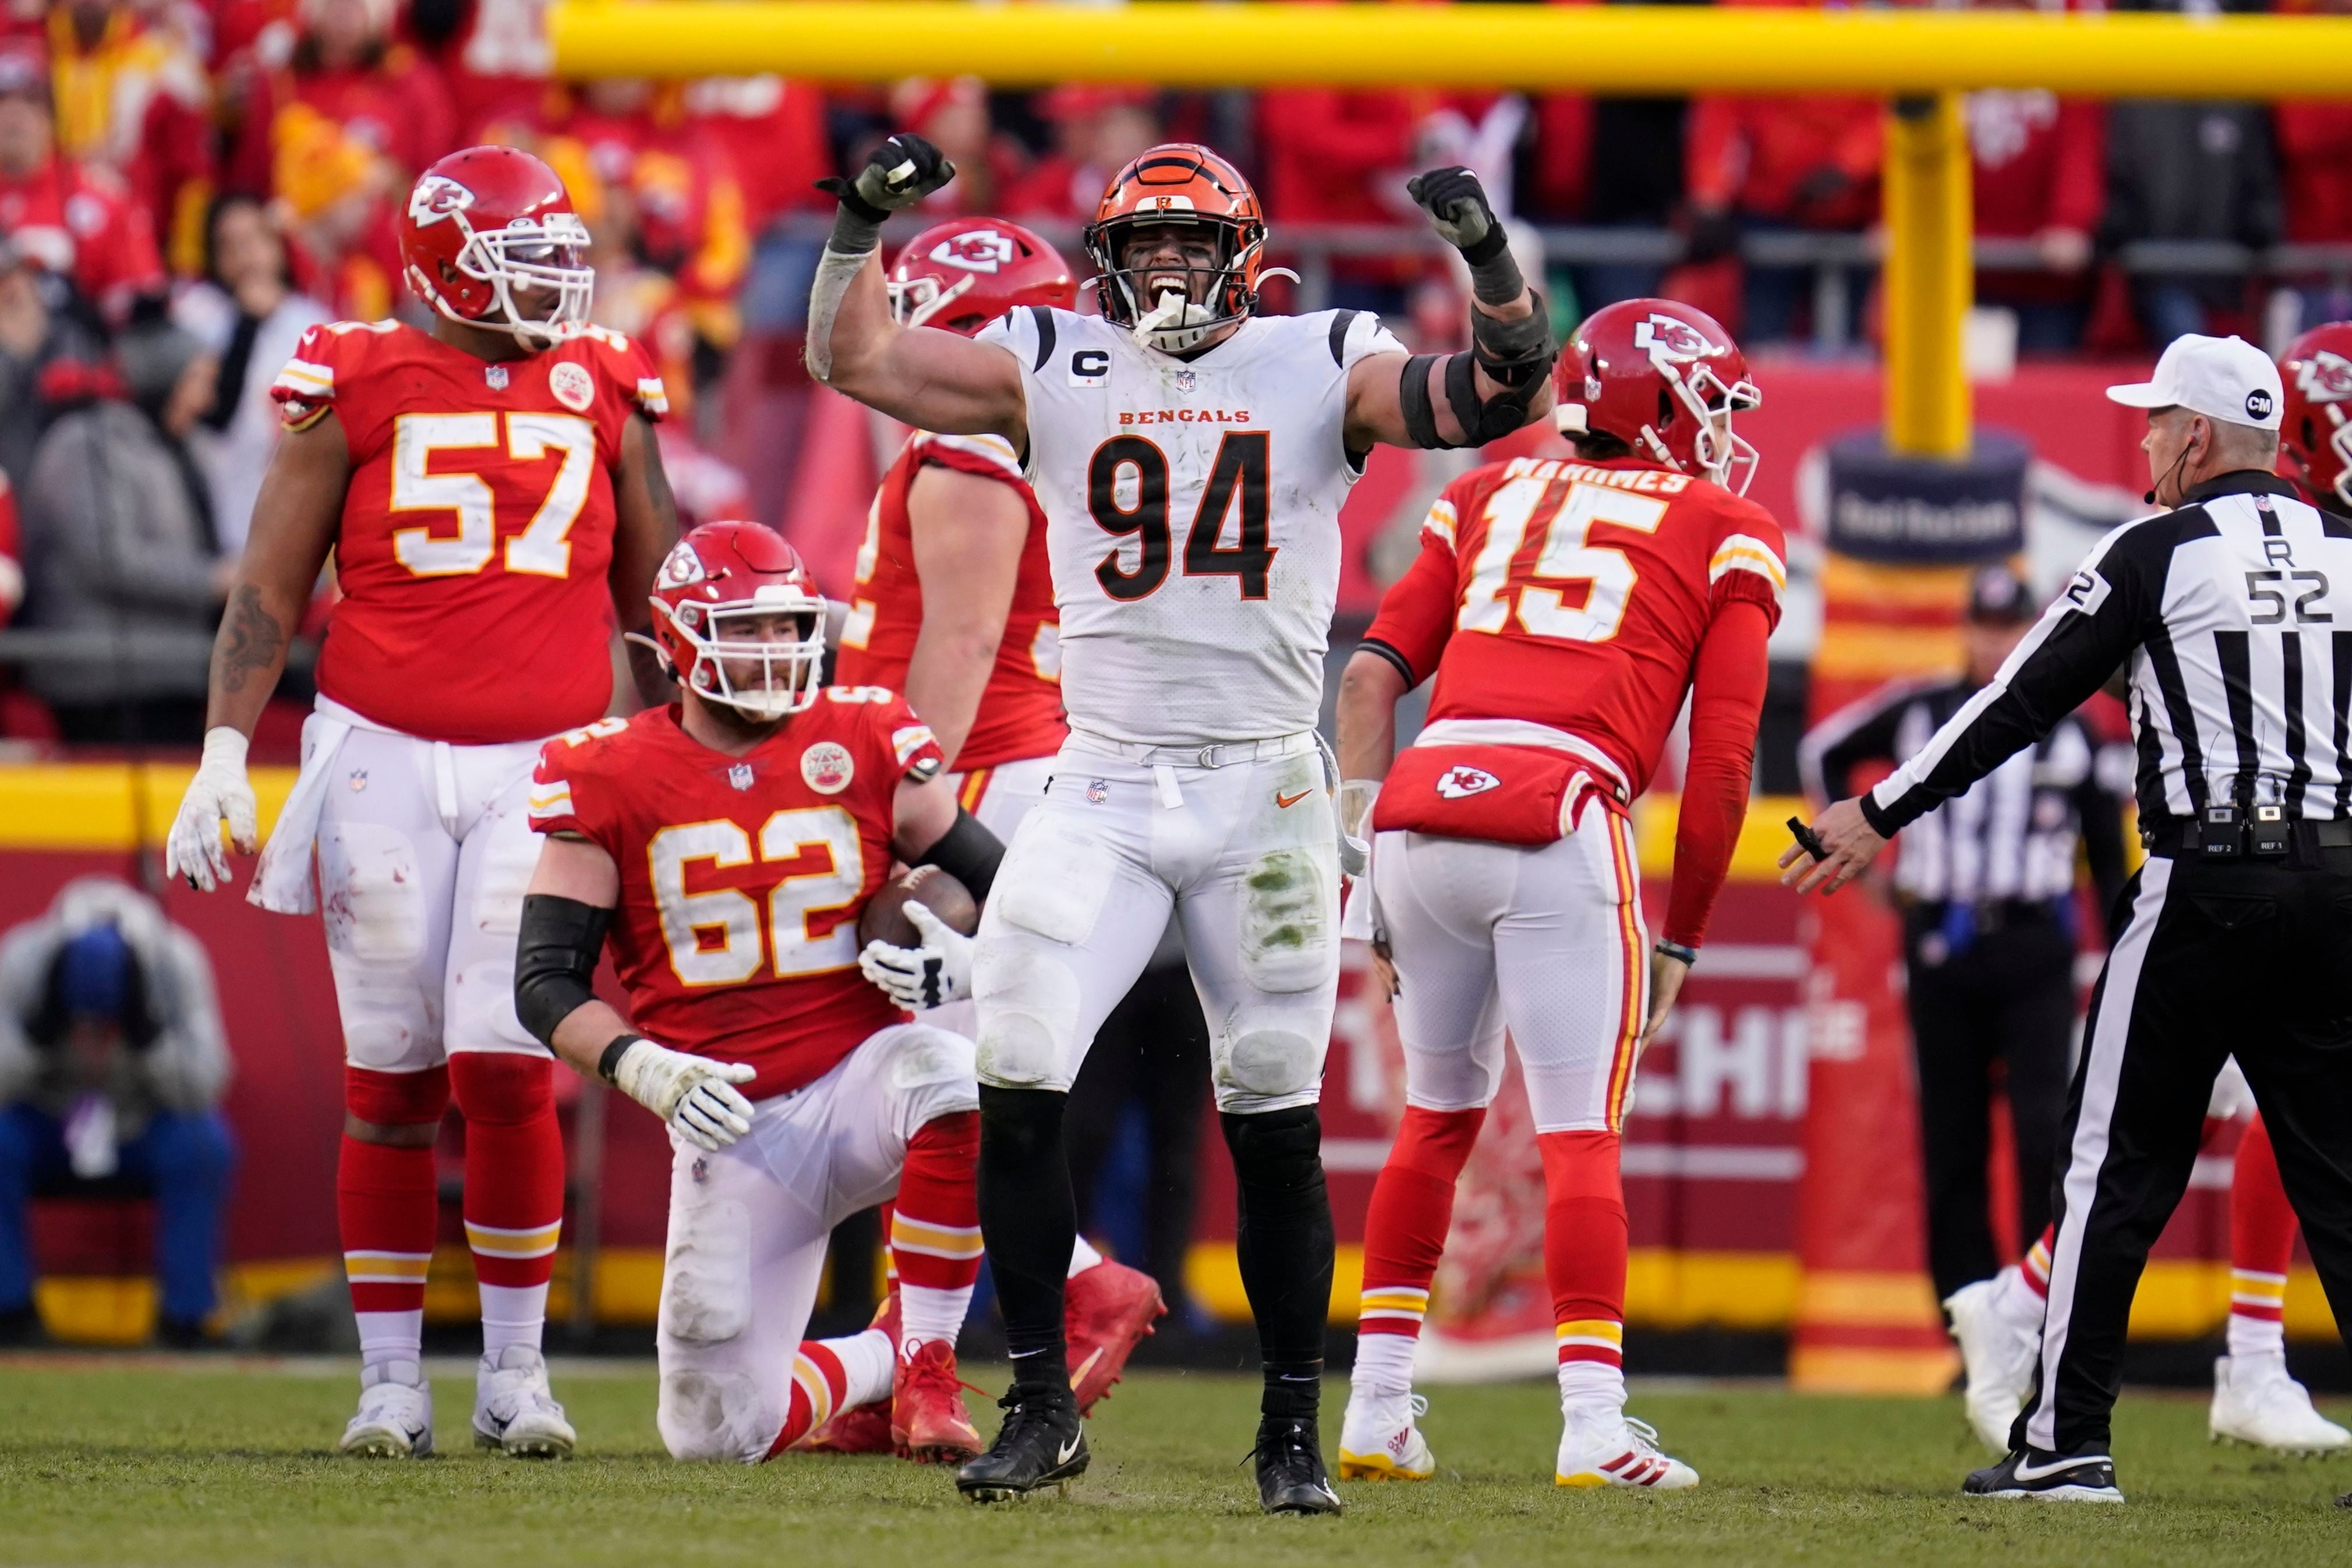 Bengals 27-24 Chiefs (Jan 30, 2022) Play-by-Play - ESPN